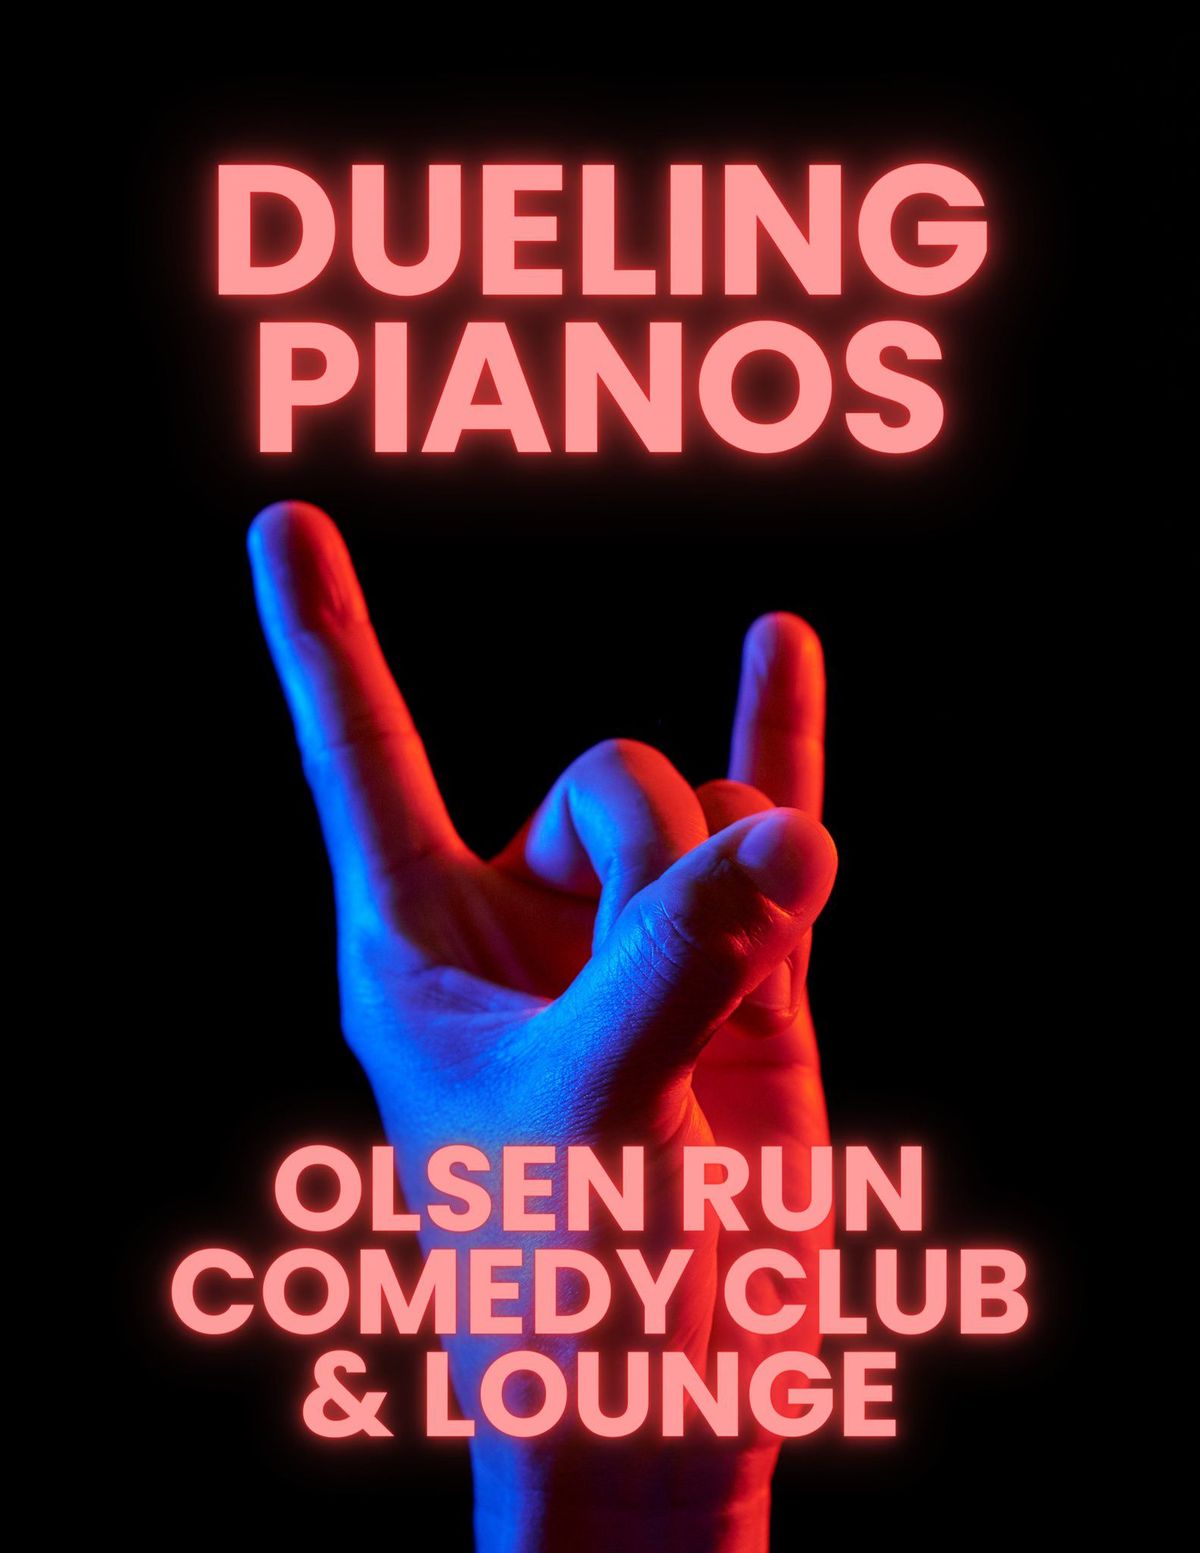 Dueling Pianos - June 21st and June 22nd!